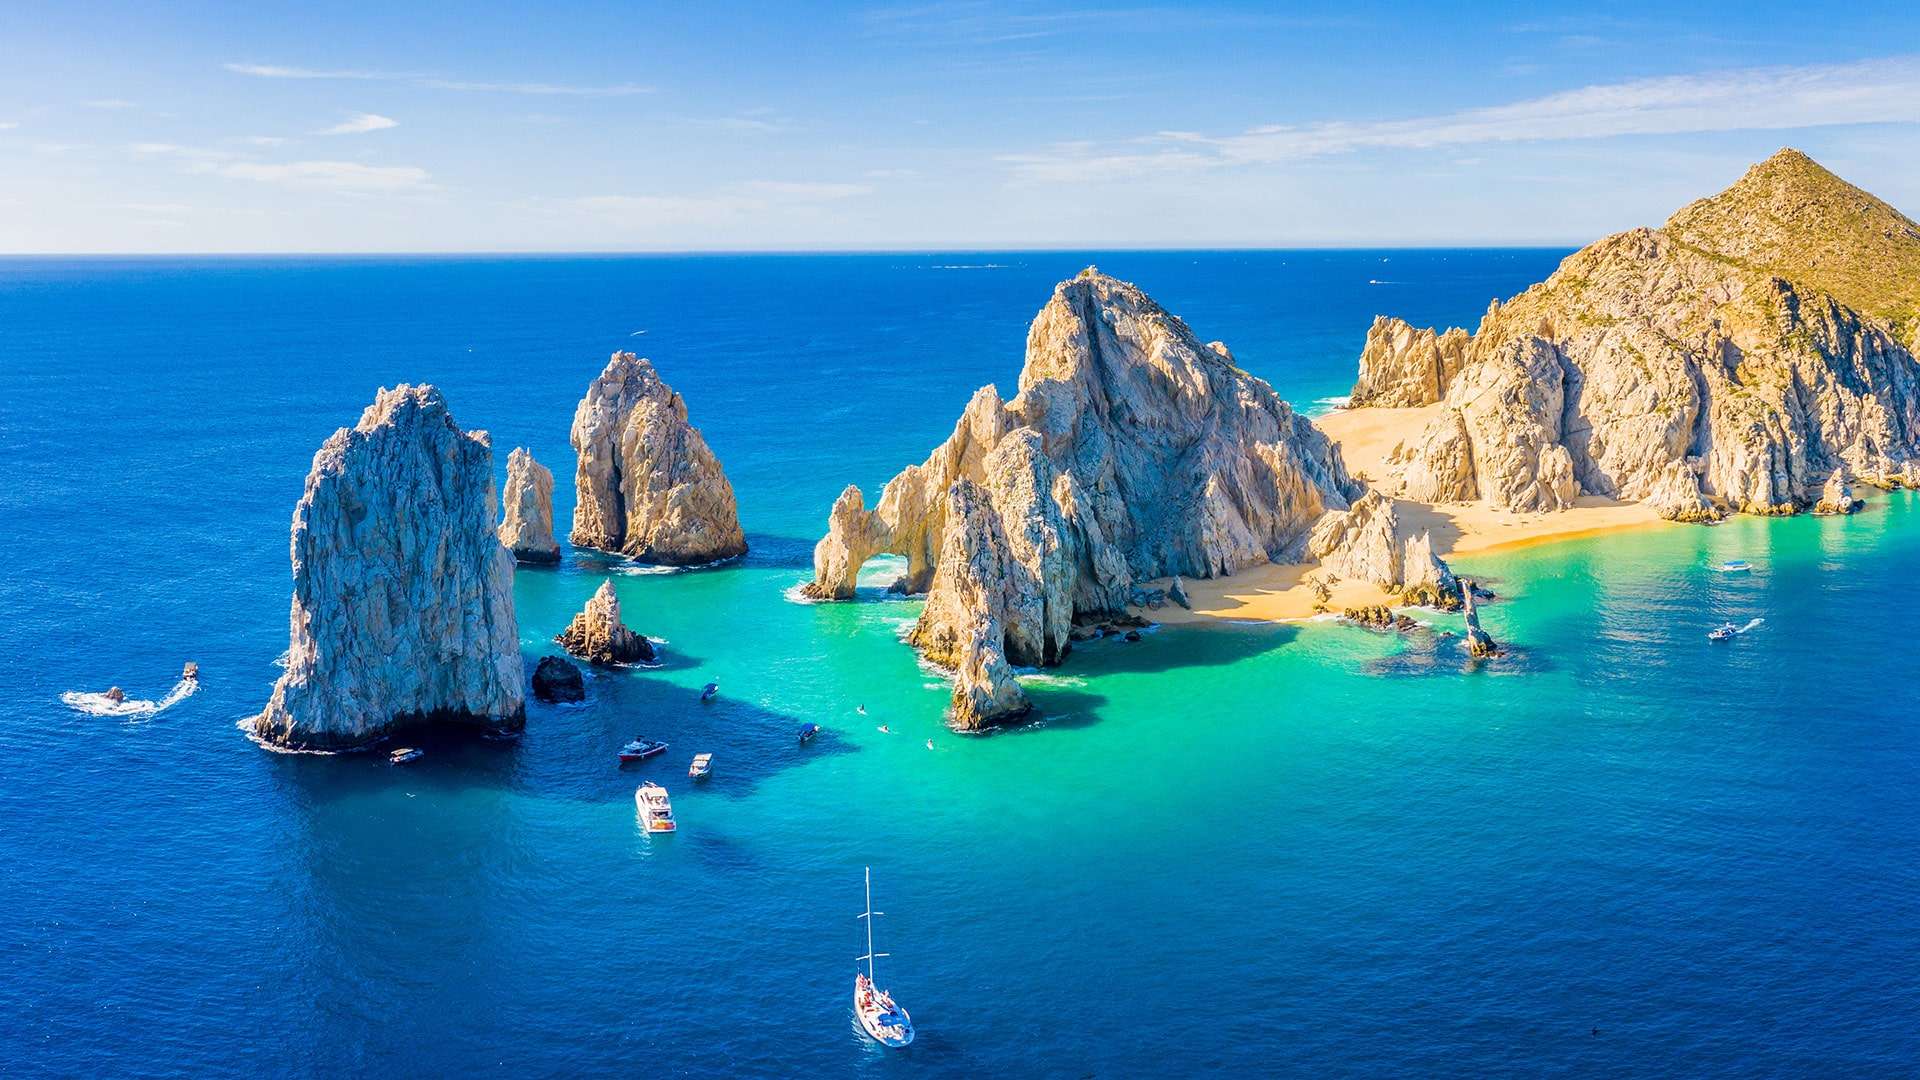 cabo activities tours